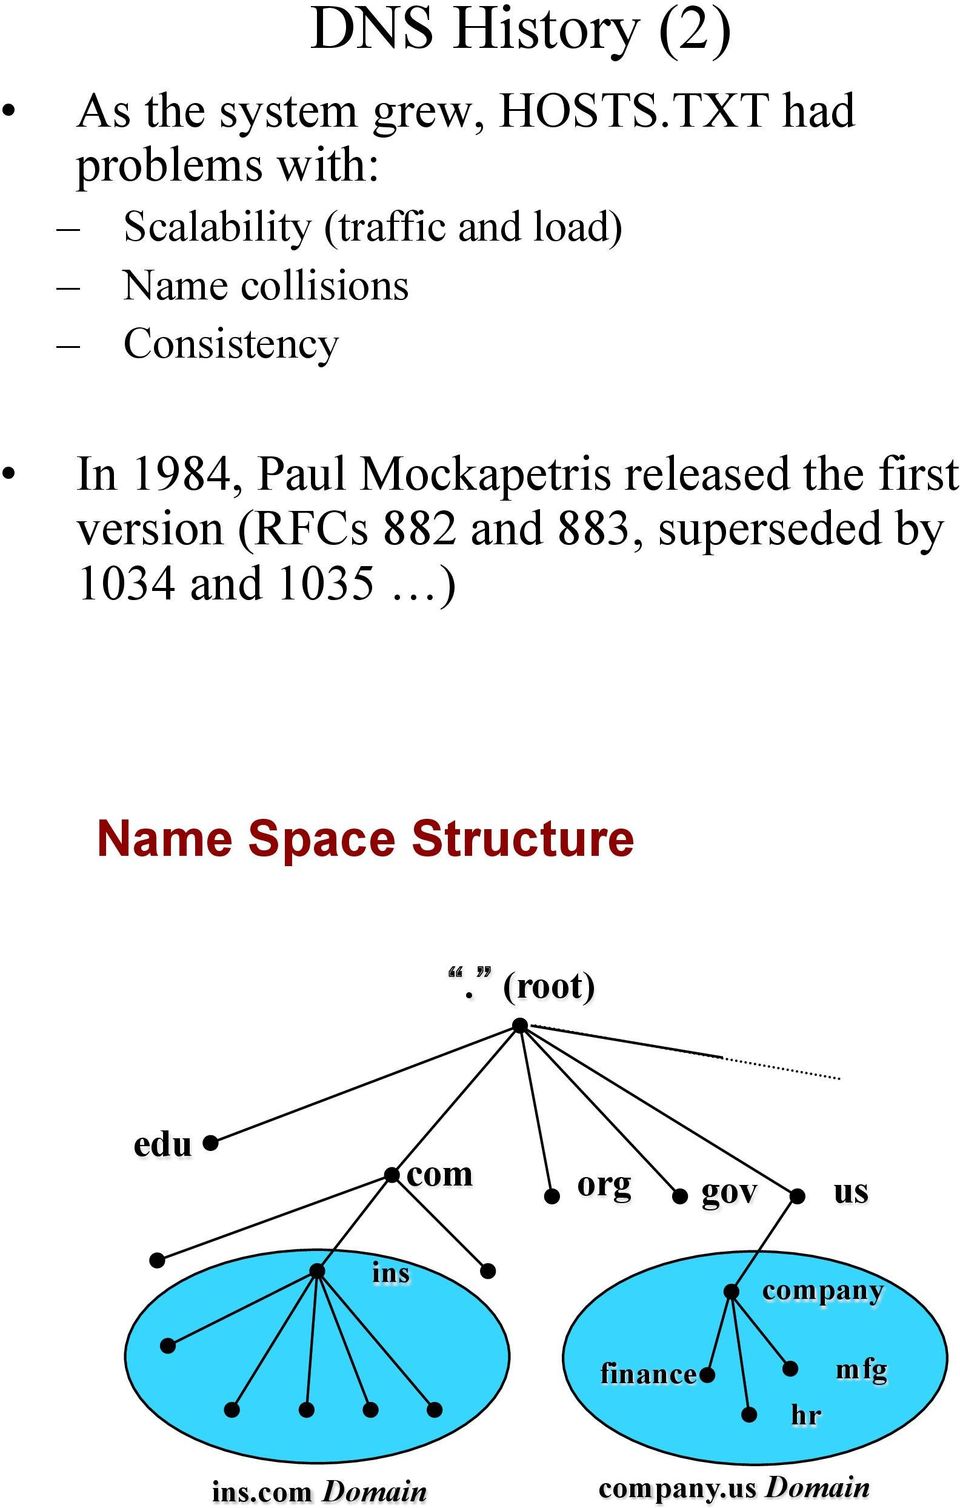 1984, Paul Mockapetris released the first version (RFCs 882 and 883, superseded by